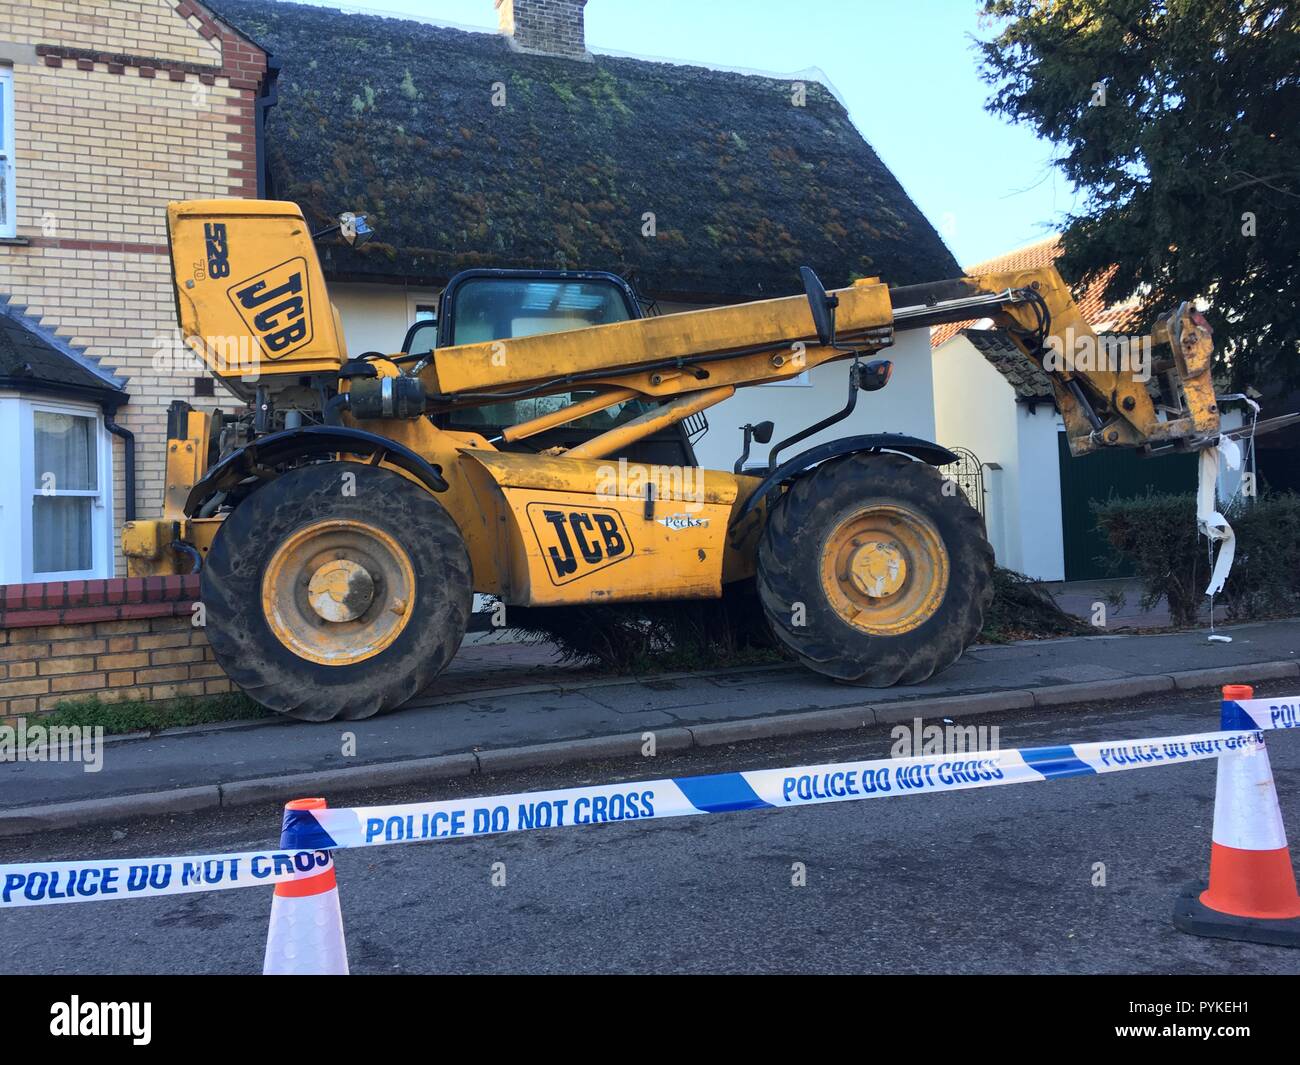 Great Shelford, Cambridgeshire, UK. 29th Oct, 2018. Police say that the raid happened at 2am. The JCB pictured was used to knock down the wall of the building. No one was hurt. Great Shelford Branch of Barclays Bank. Ram Raid Credit: Andrew Brown/Alamy Live News Stock Photo